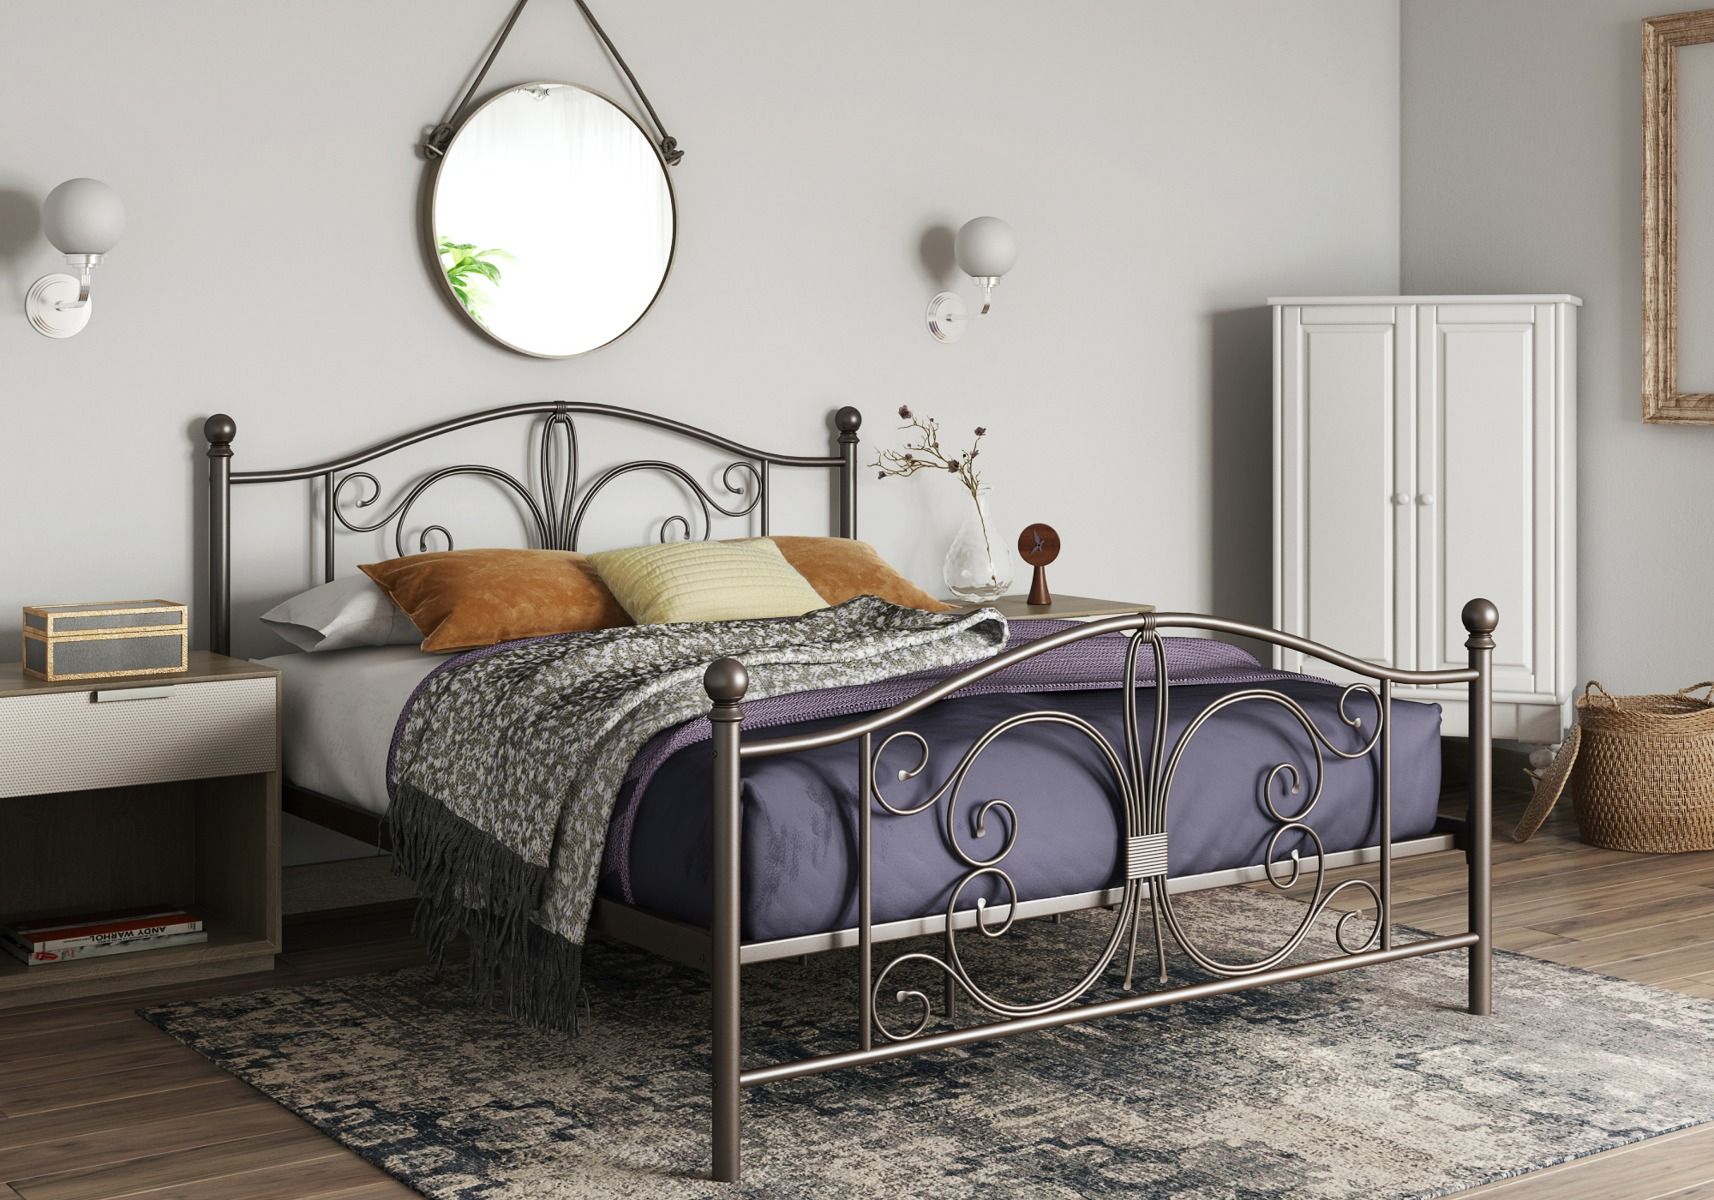 Dorel Ay Metal Bed Frame, How To Expand Metal Bed Frame